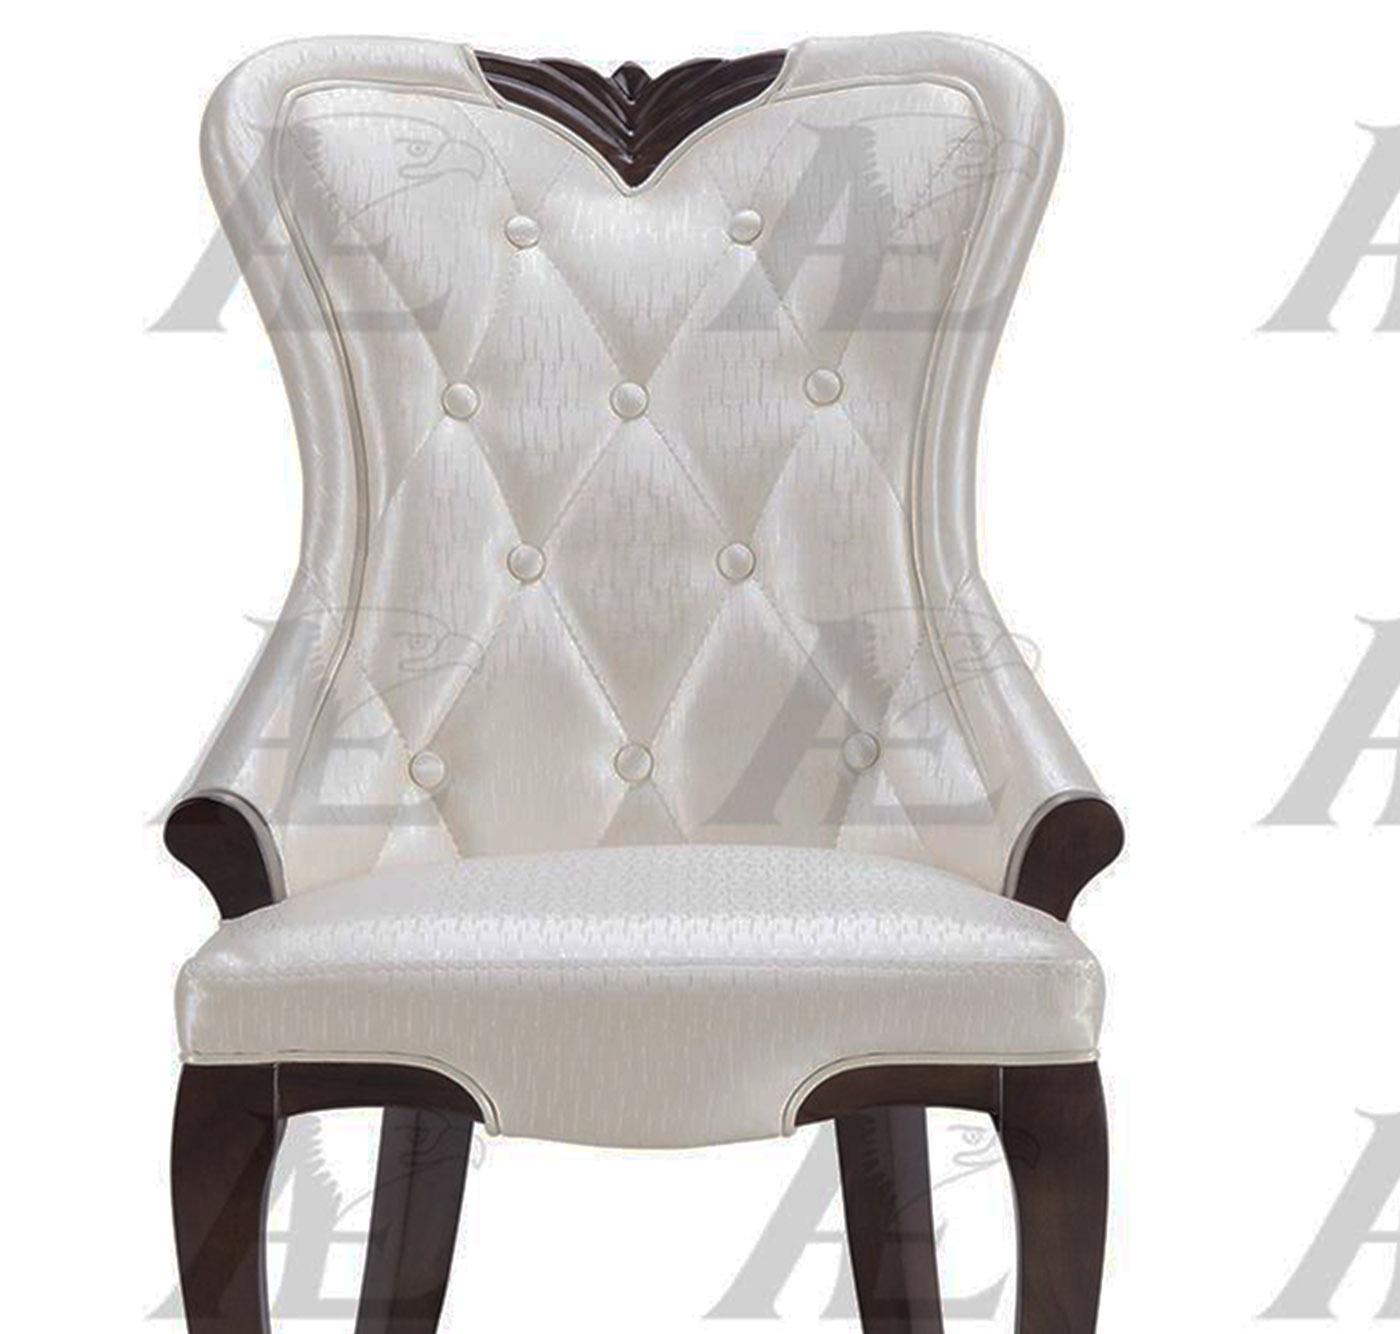 

    
American Eagle Furniture CK-H168-CRM Dining Side Chair Cream CK-H168-CRM Set-2
